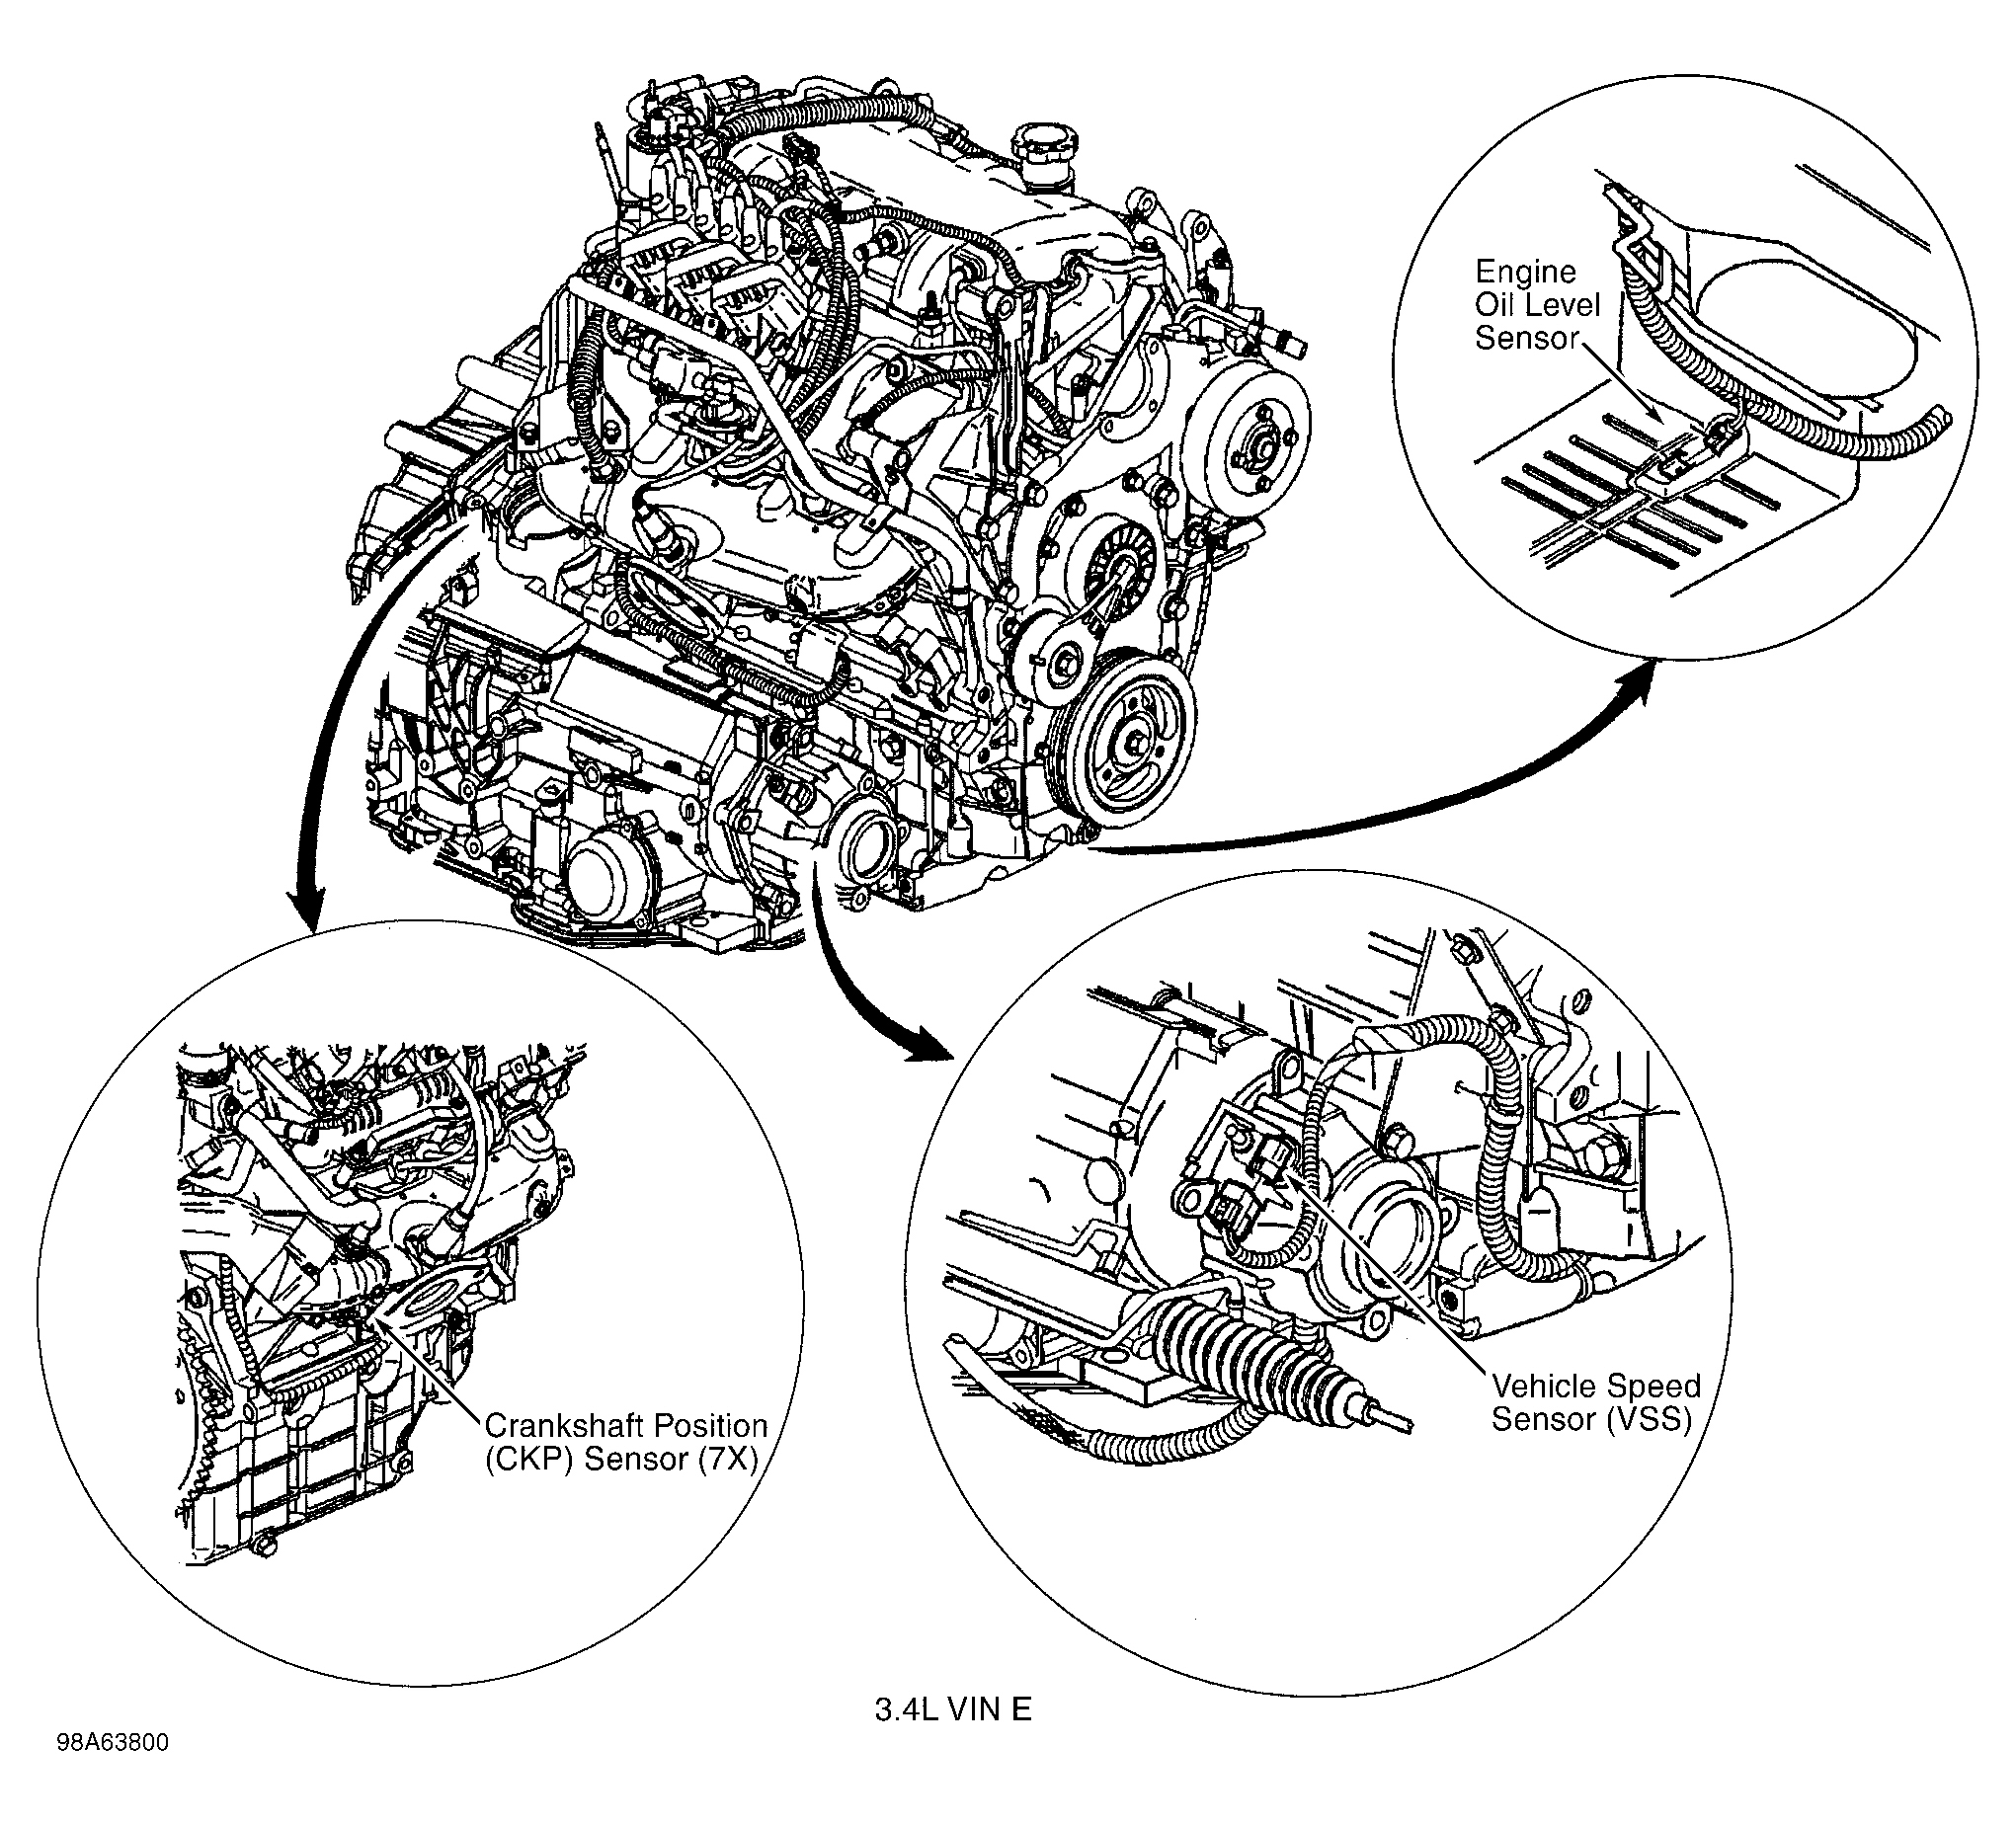 Chevrolet Monte Carlo SS 2000 - Component Locations -  Right Side Of Engine (3.4L VIN E)